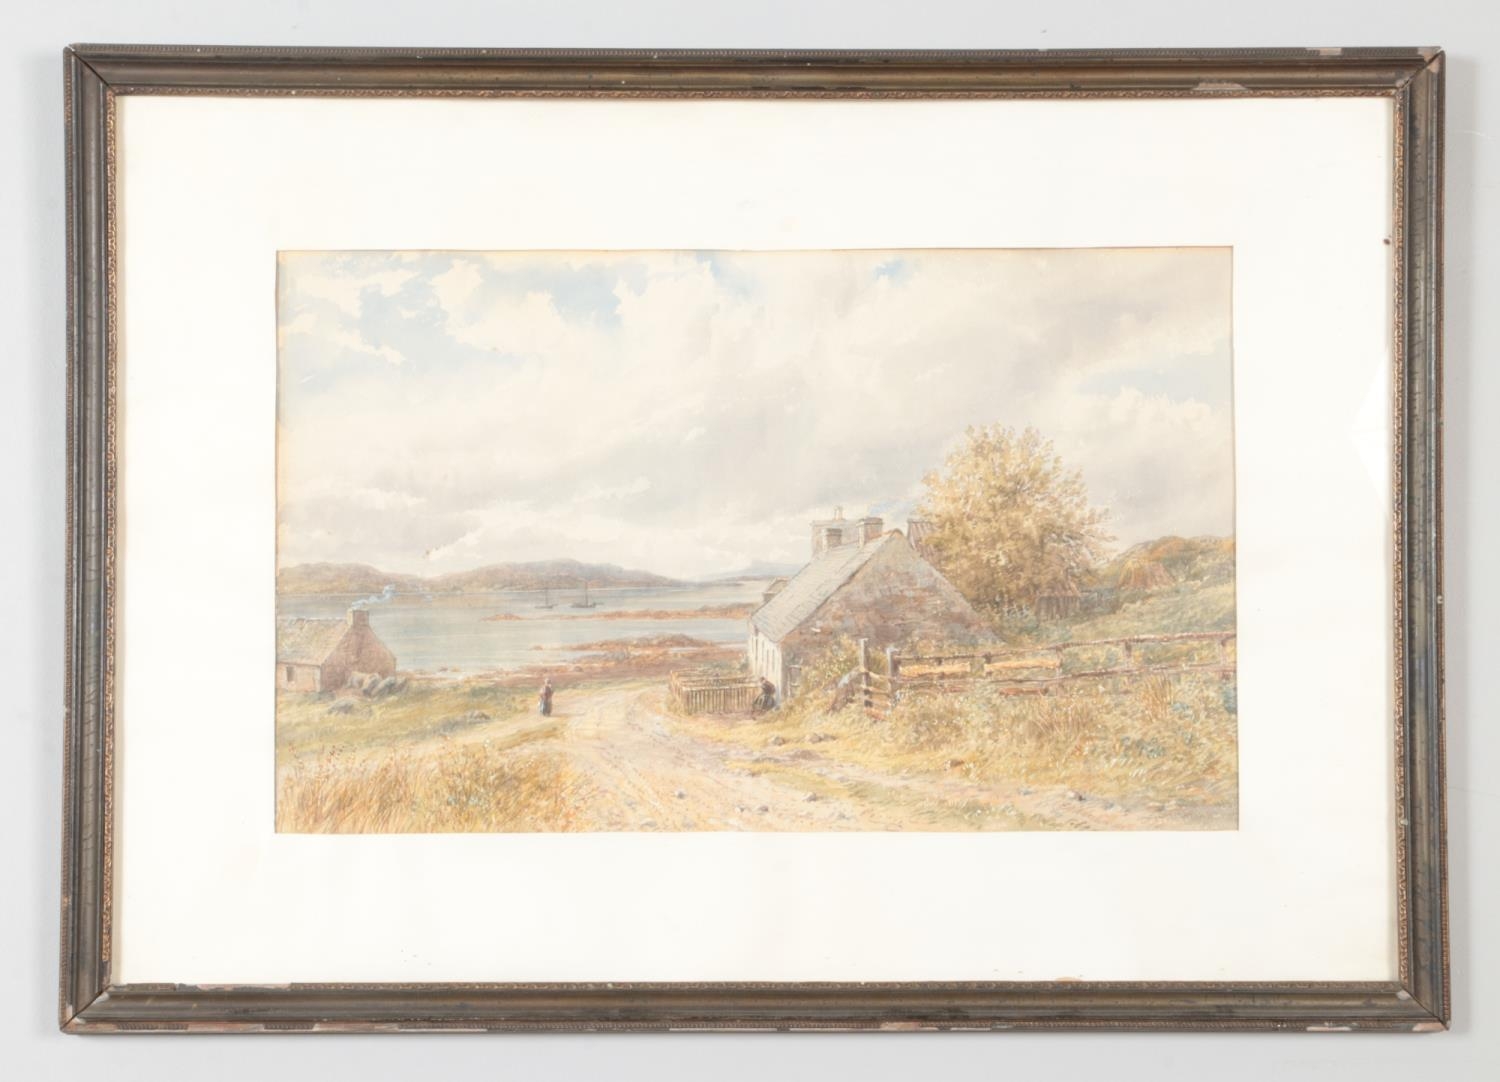 Ebenezer Alfred Warmington (British, 1830-1903), a framed watercolour painting depicting two